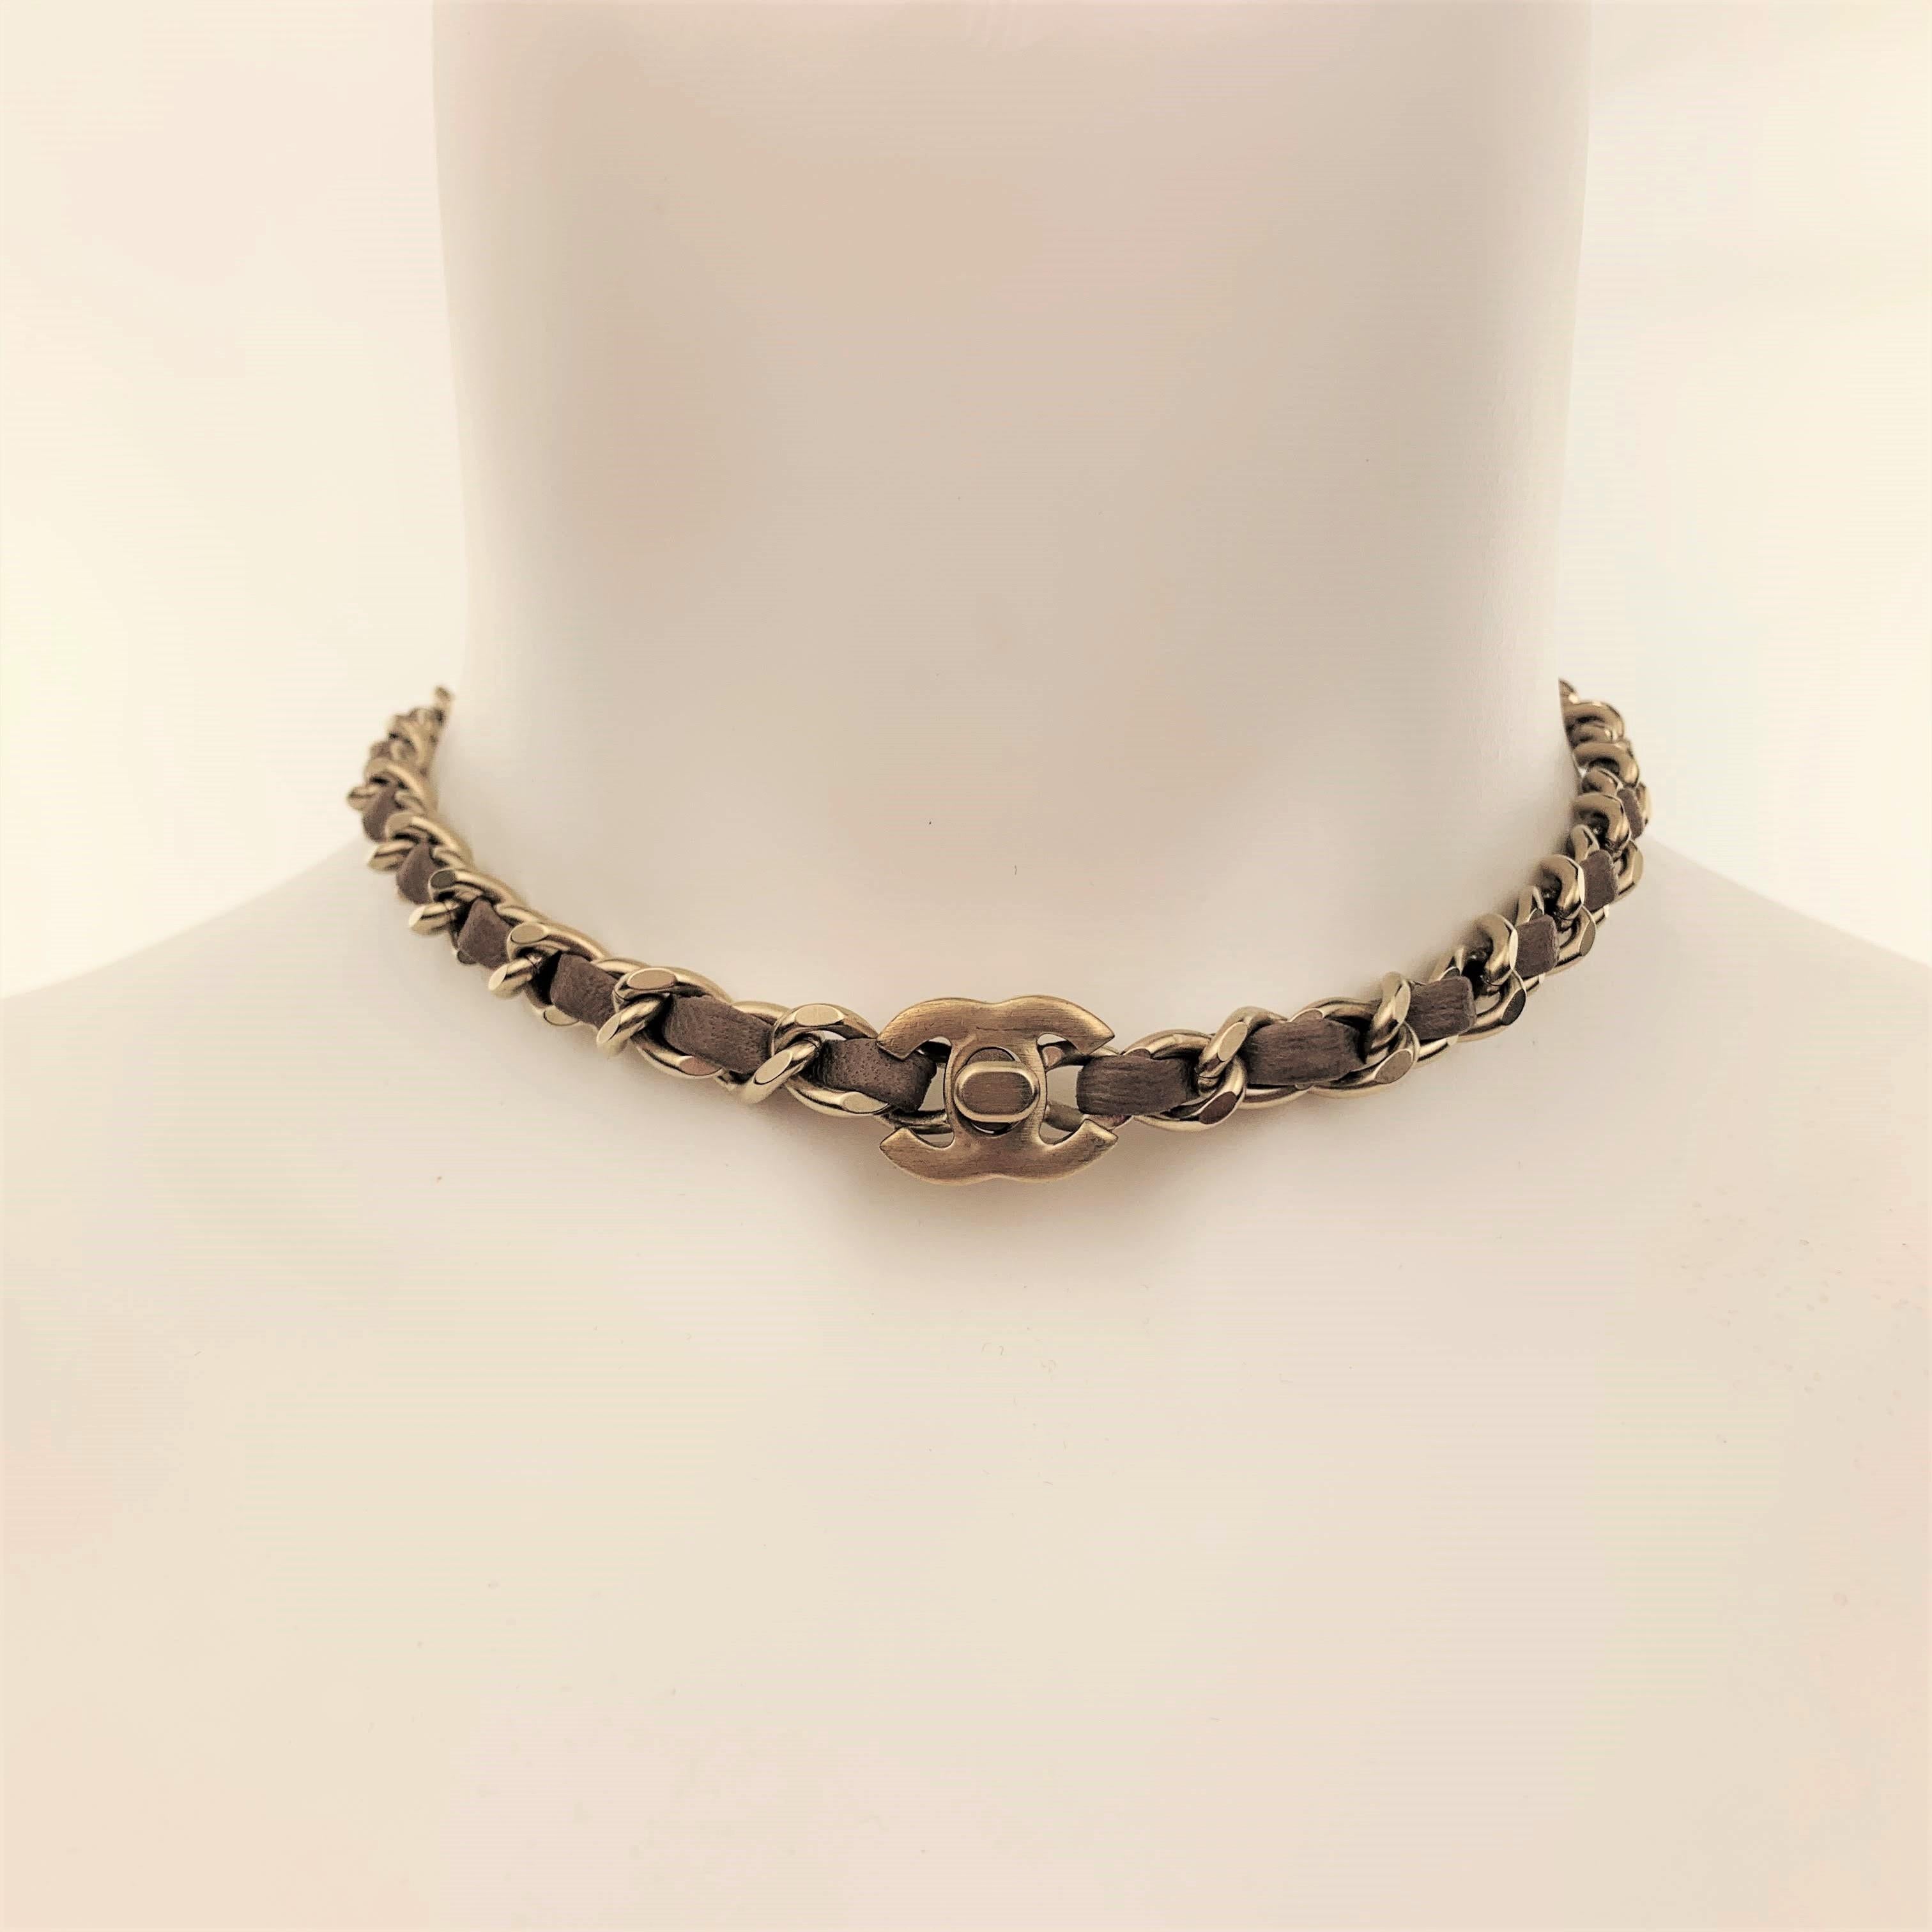 CHANEL circa 2012 choker necklace comes in muted gold tone matte metal with a chain strap woven with taupe leather and CC logo turn lock closure. Made in Italy.
 
Excellent Pre-Owned Condition.
Marked: 12 P
 
Length: 15 in.
Width: 0.75 cm.